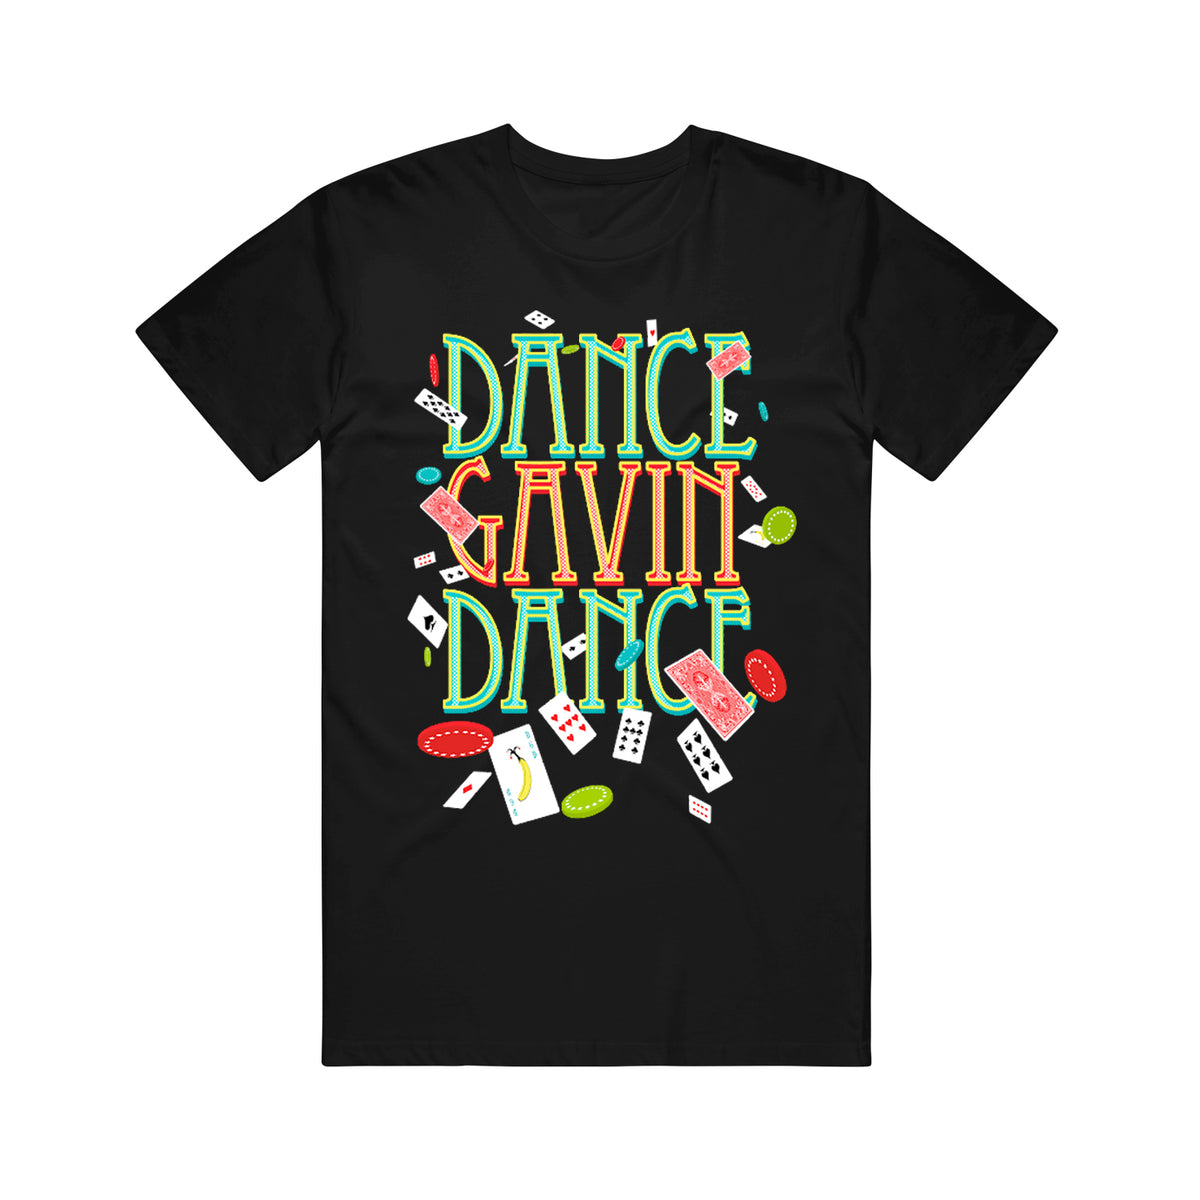 image of a black tee shirt on a white background. tee has full chest print that says dance gavin dance with playing cards and poker chips around it.